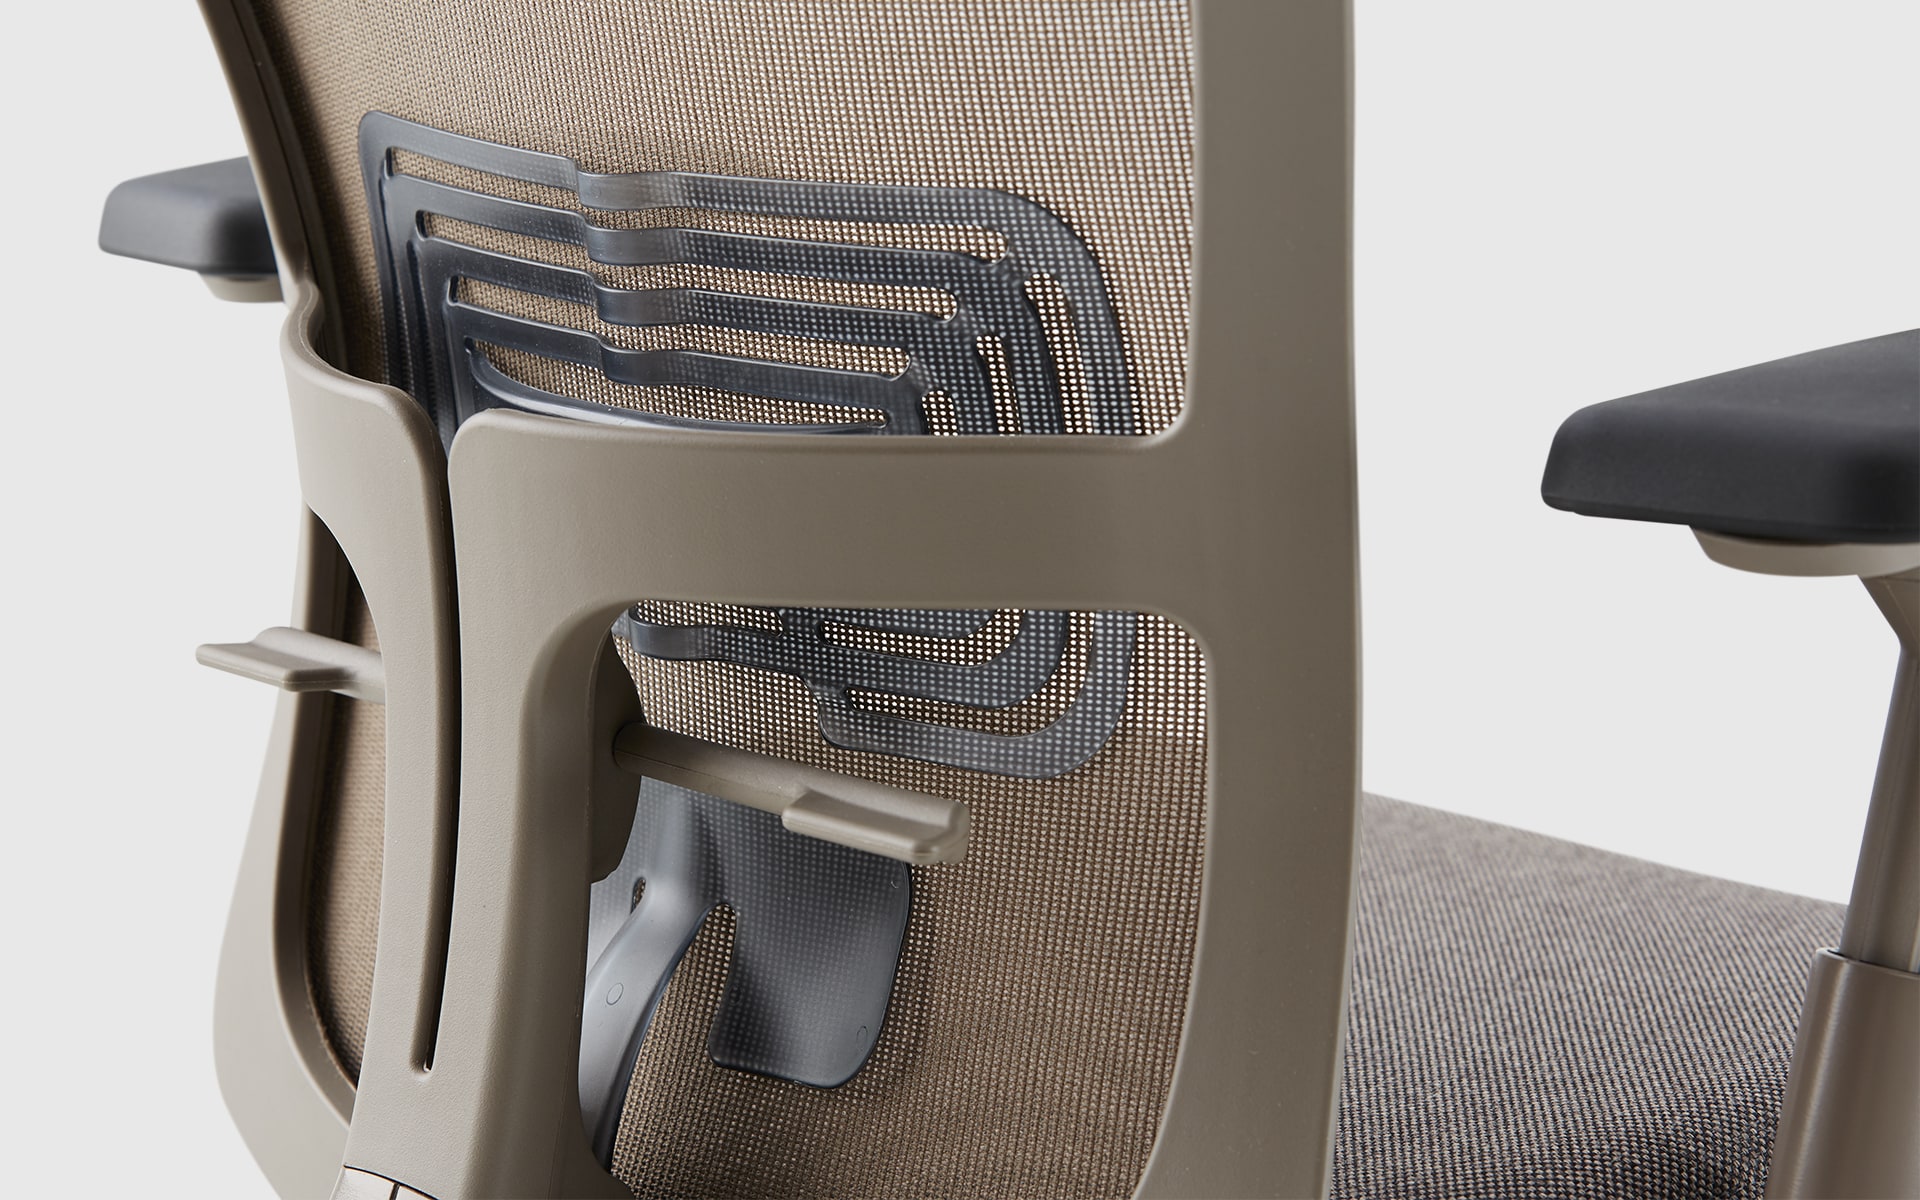 Close-up of the ergonomic backrest of the Haworth Zody office chair by ITO Design